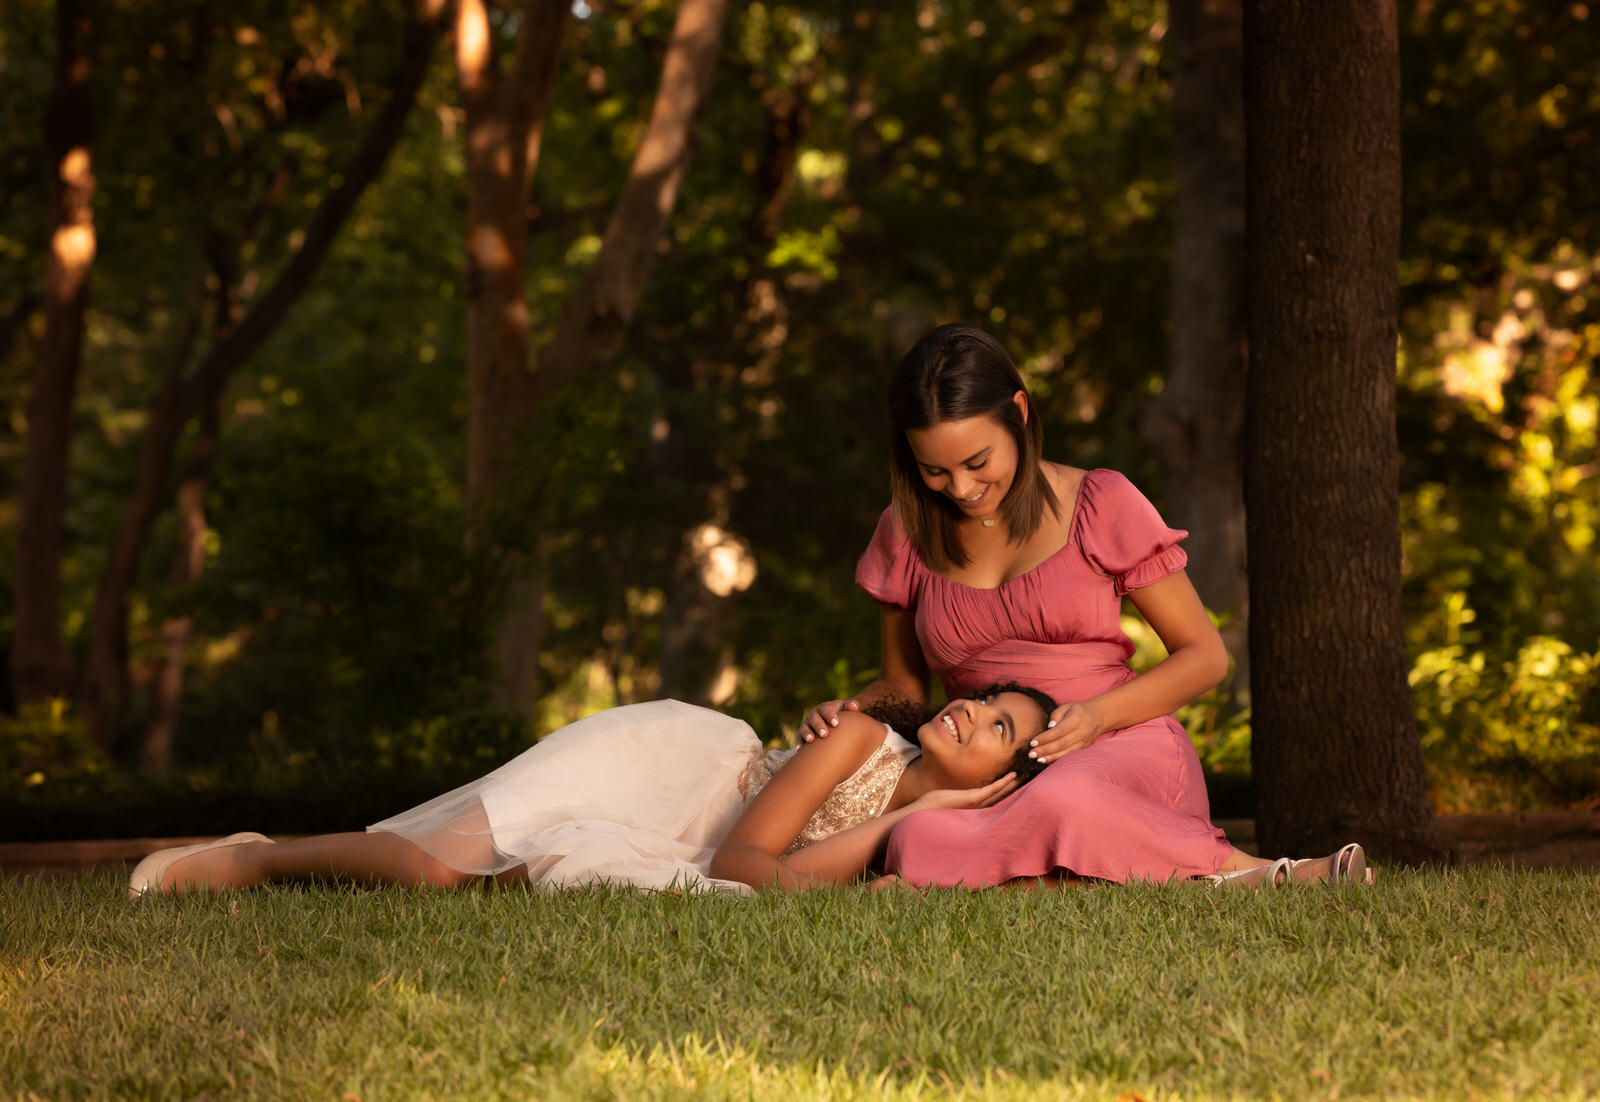 A mother sits in a pink dress in a park with her daughter's head in her lap